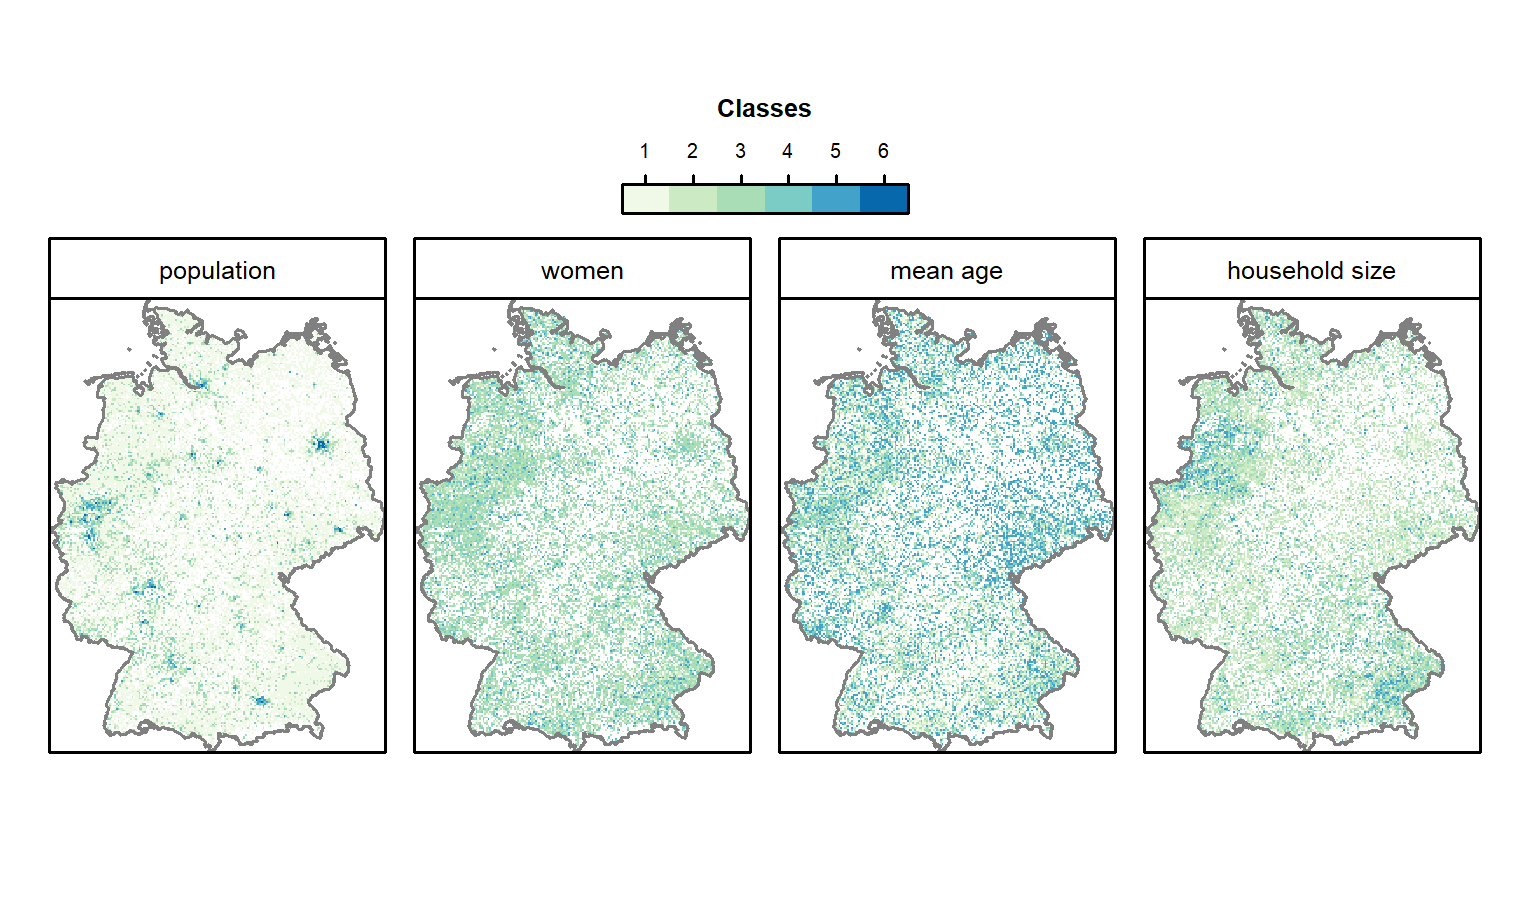 Gridded German census data of 2011 (see Table 13.1 for a description of the classes).